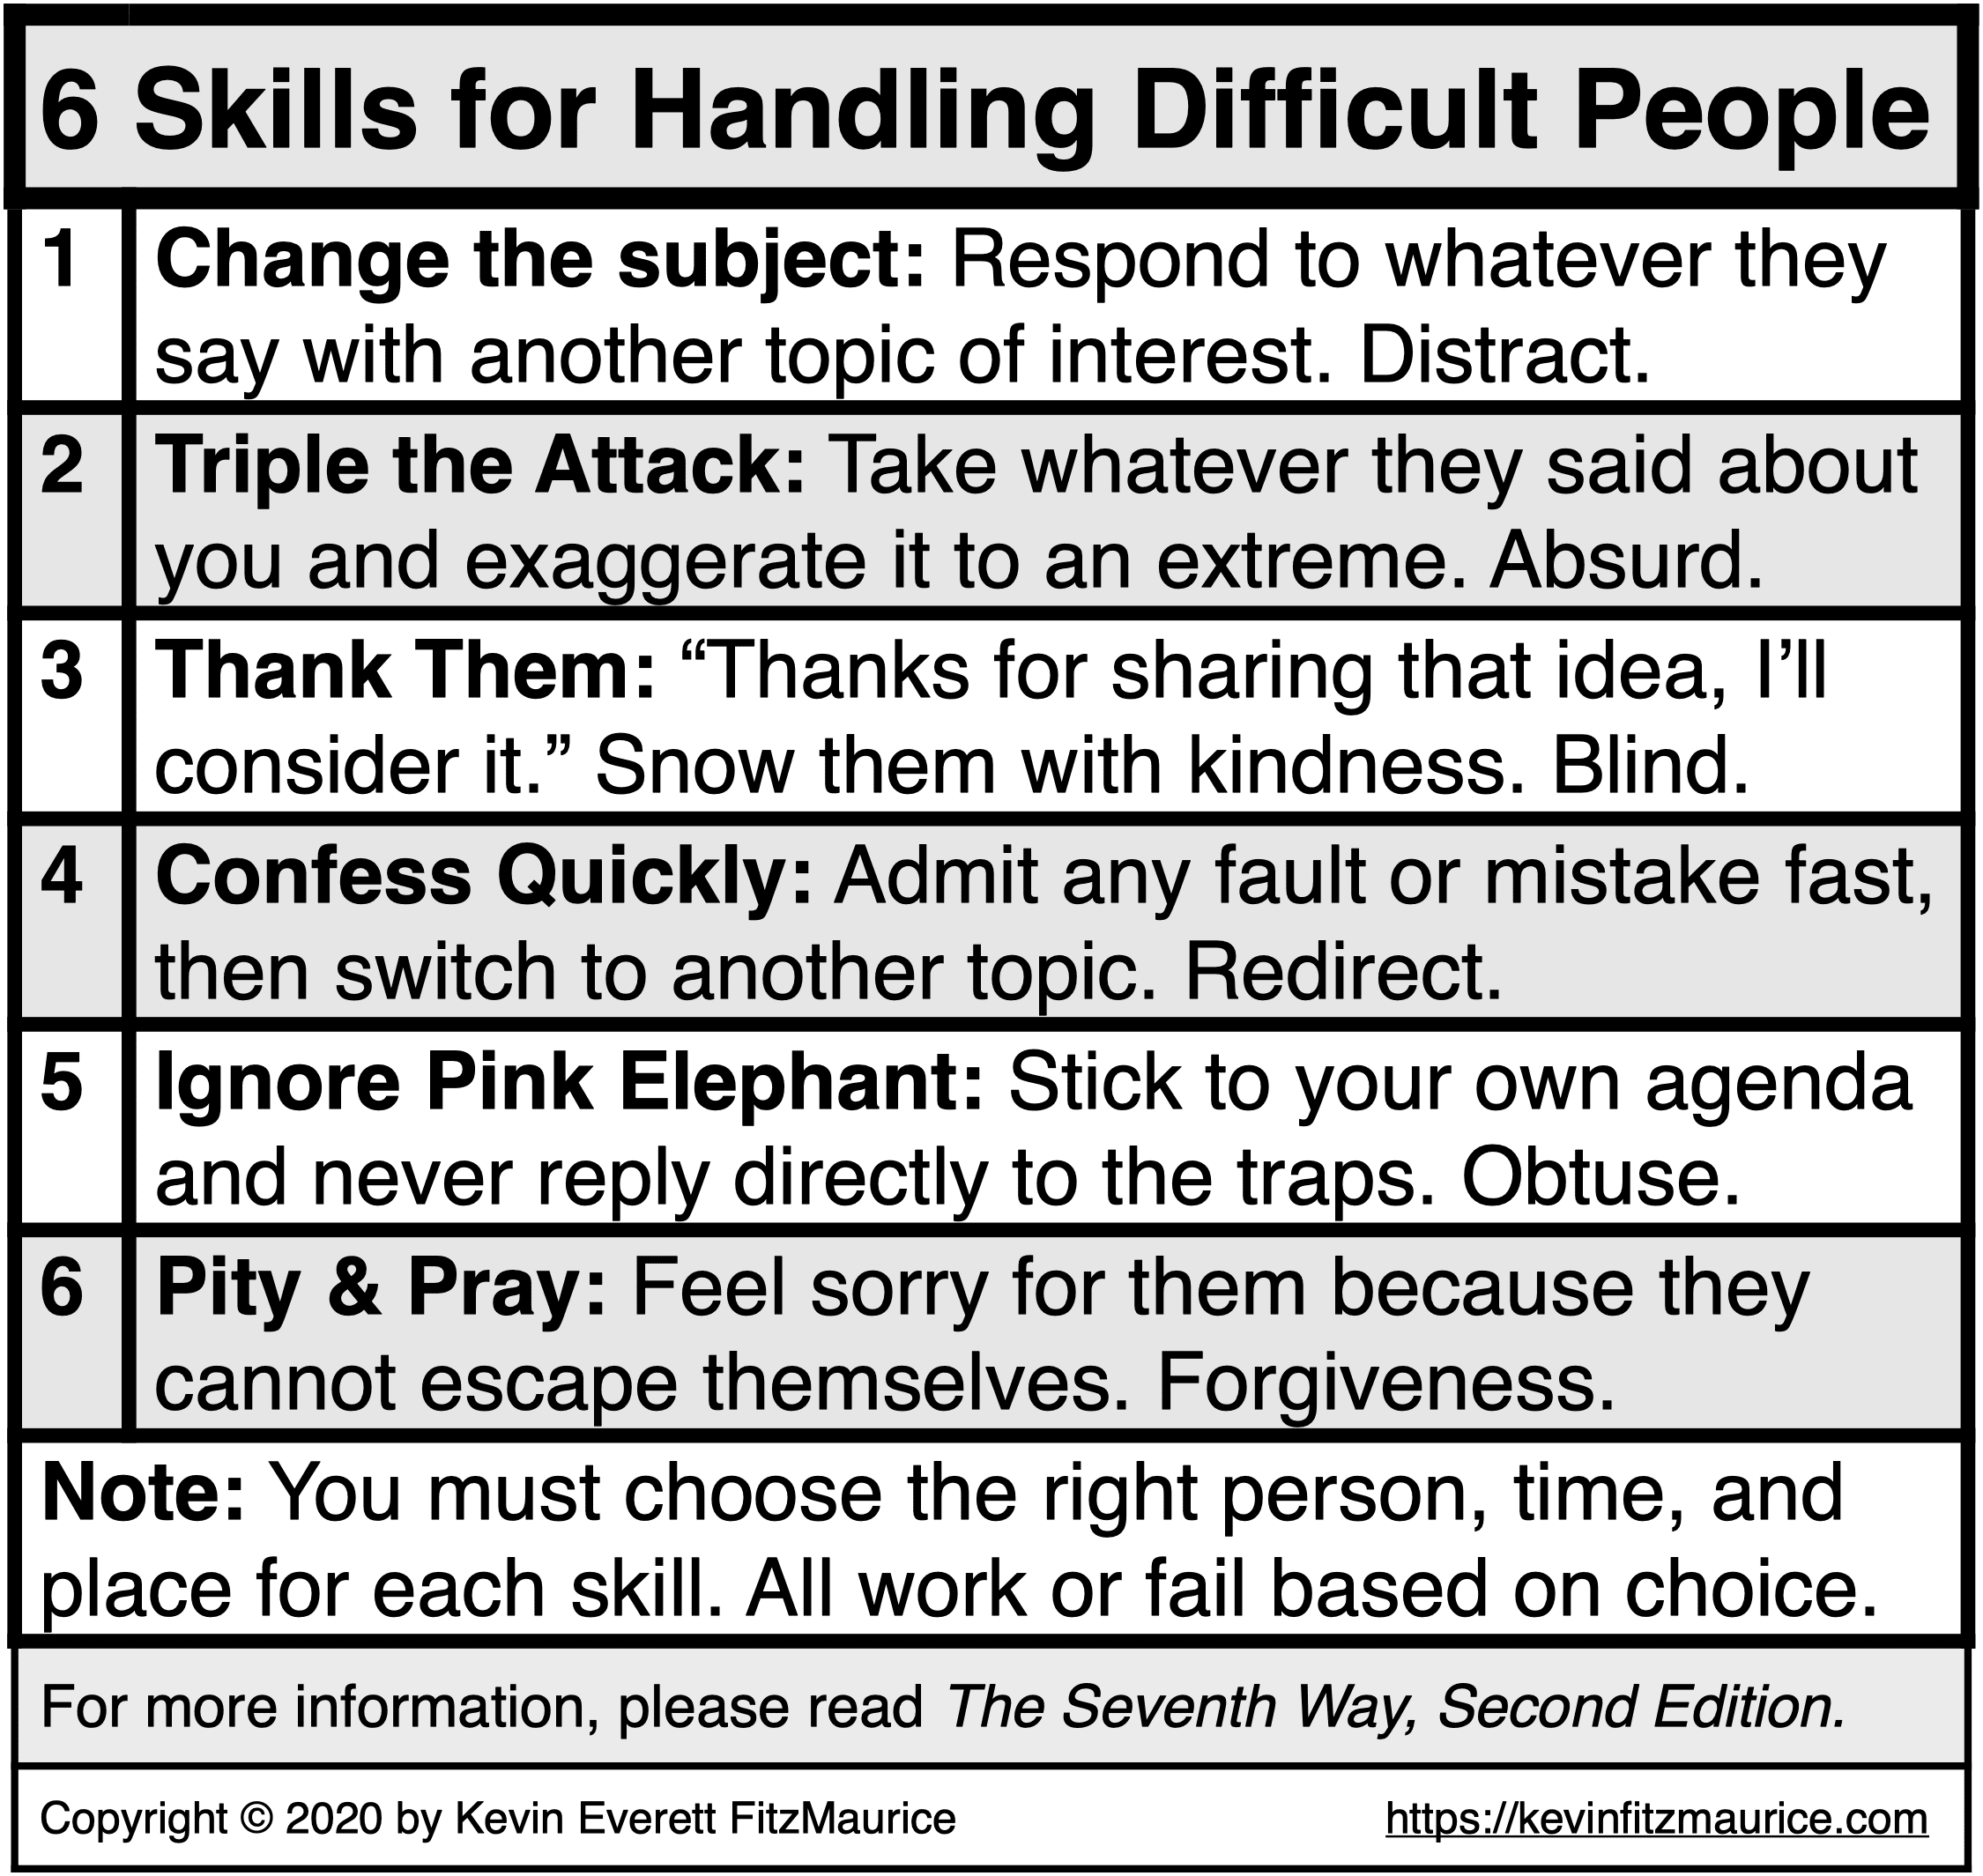 6 Skills for Handling Difficult People